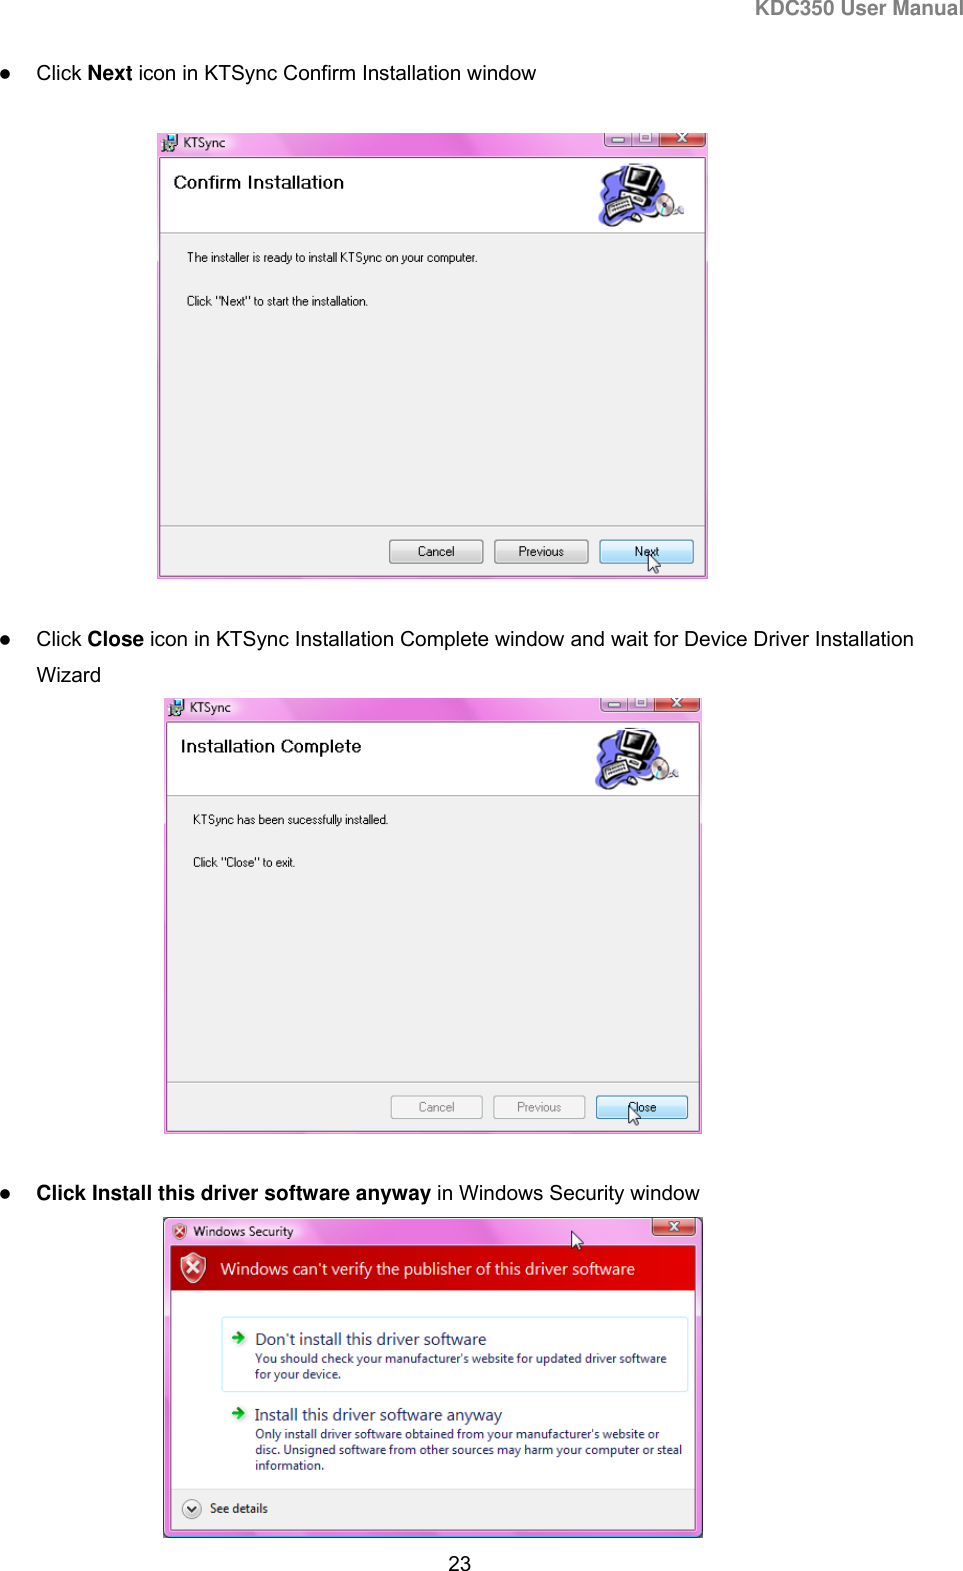 KDC350 User Manual  23   Click Next icon in KTSync Confirm Installation window     Click Close icon in KTSync Installation Complete window and wait for Device Driver Installation Wizard     Click Install this driver software anyway in Windows Security window  